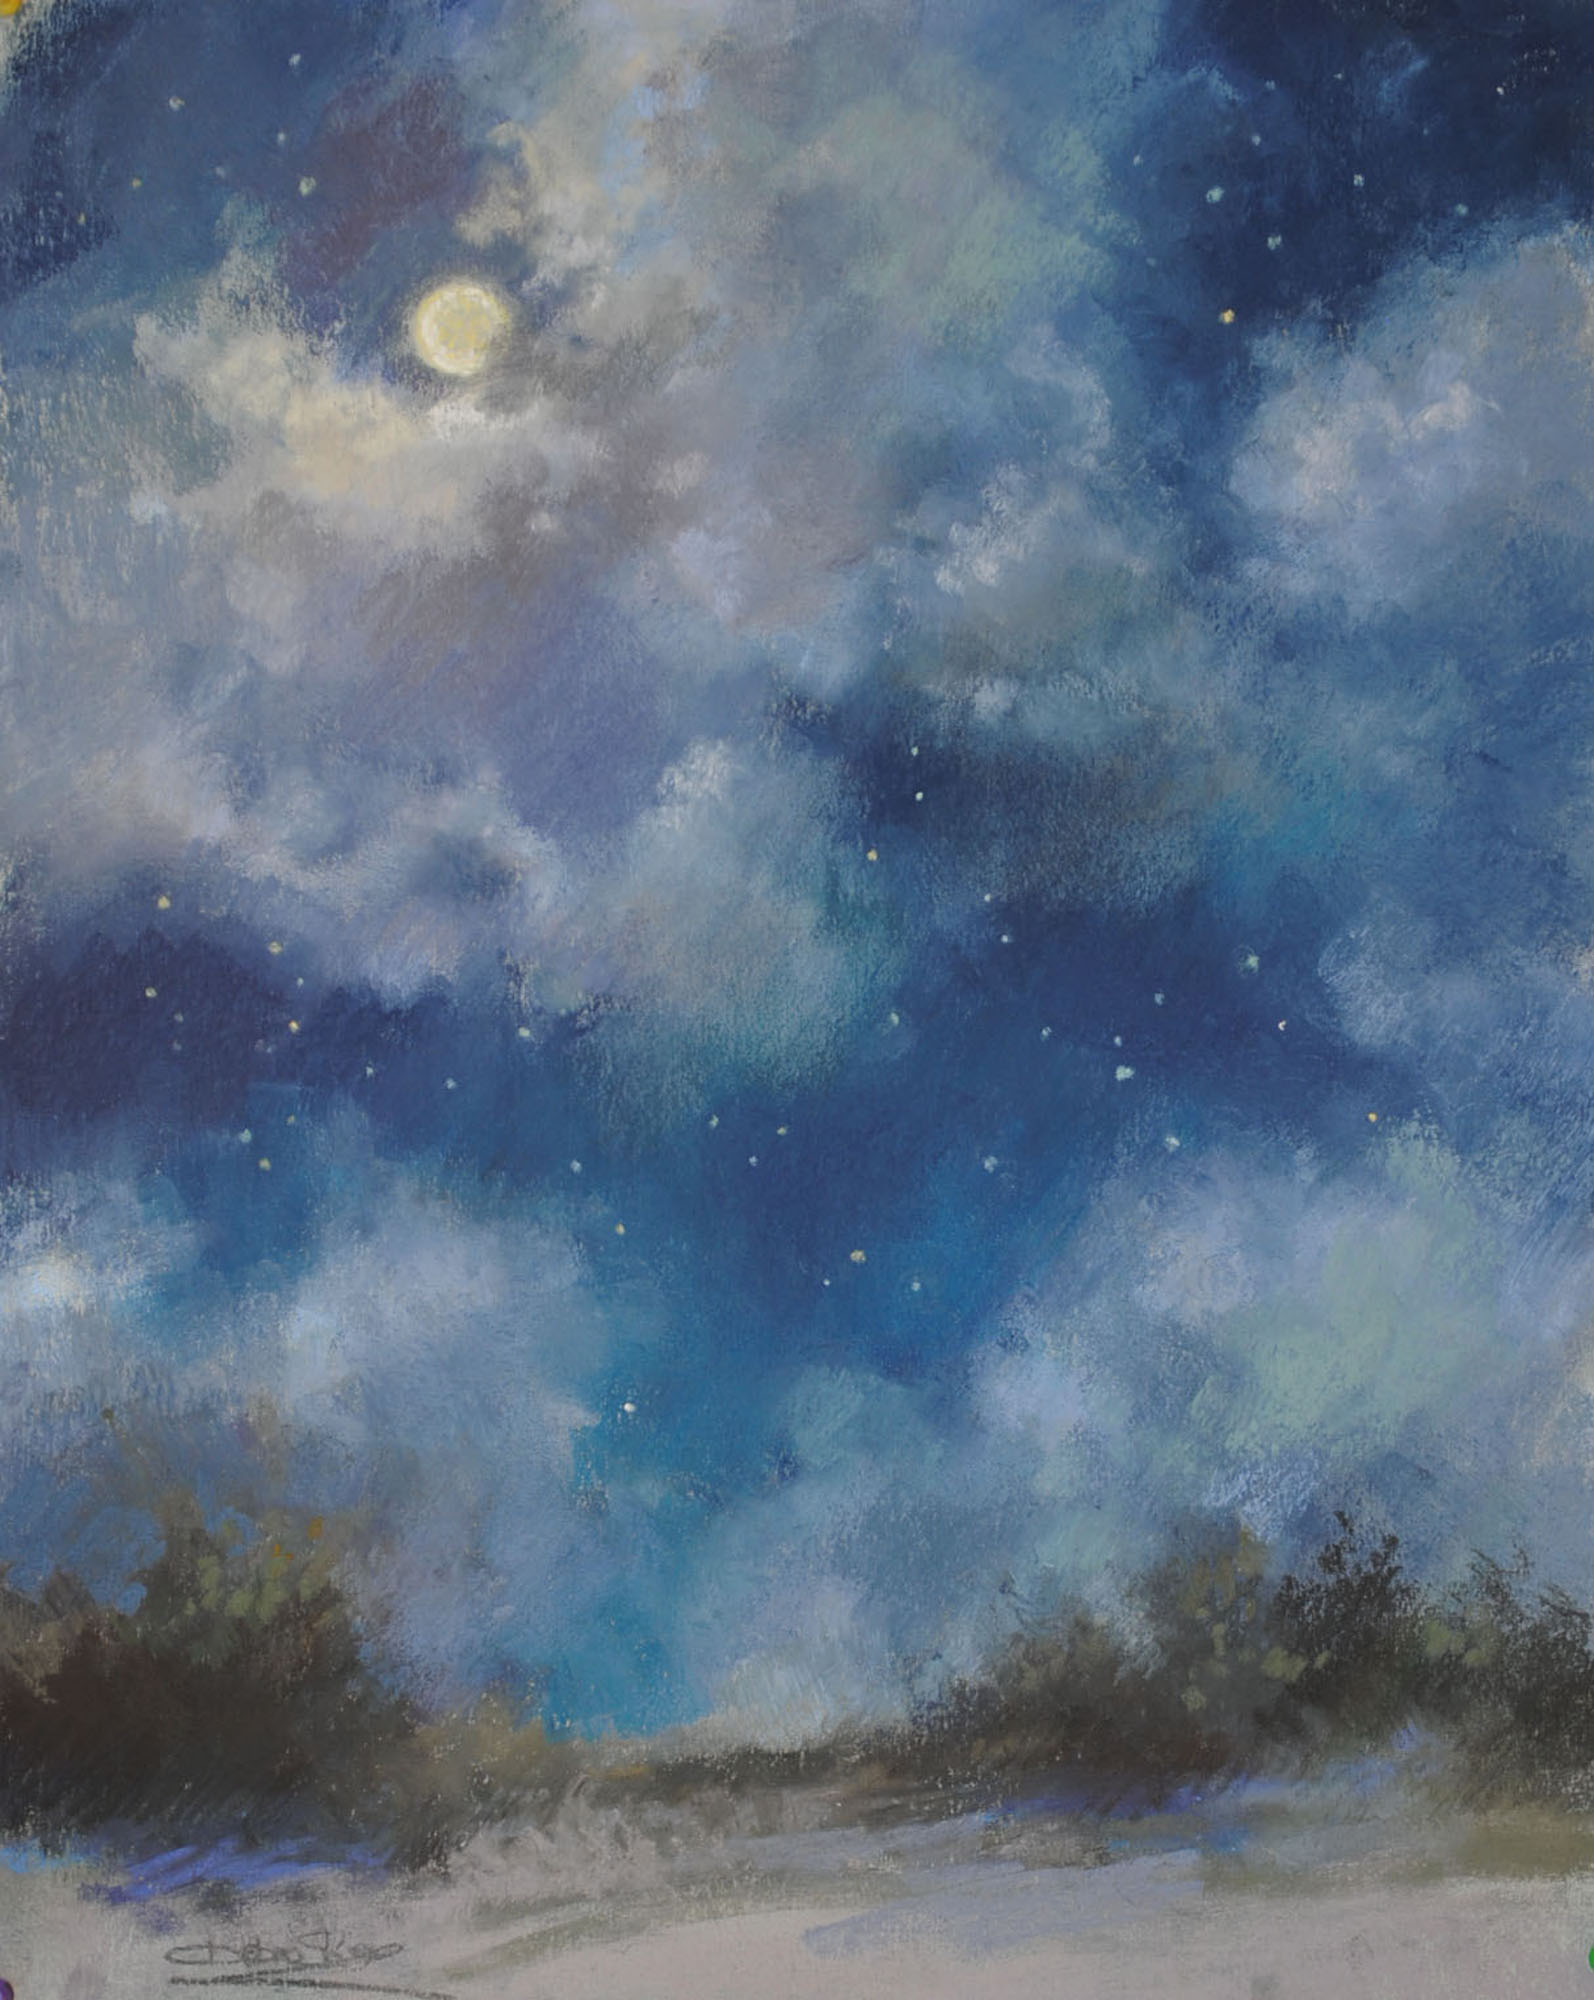 Nocturne -Christine Debrosky, "Clearing and Shining," soft pastel on Canson Mi-Teintes, 20 x 16 in